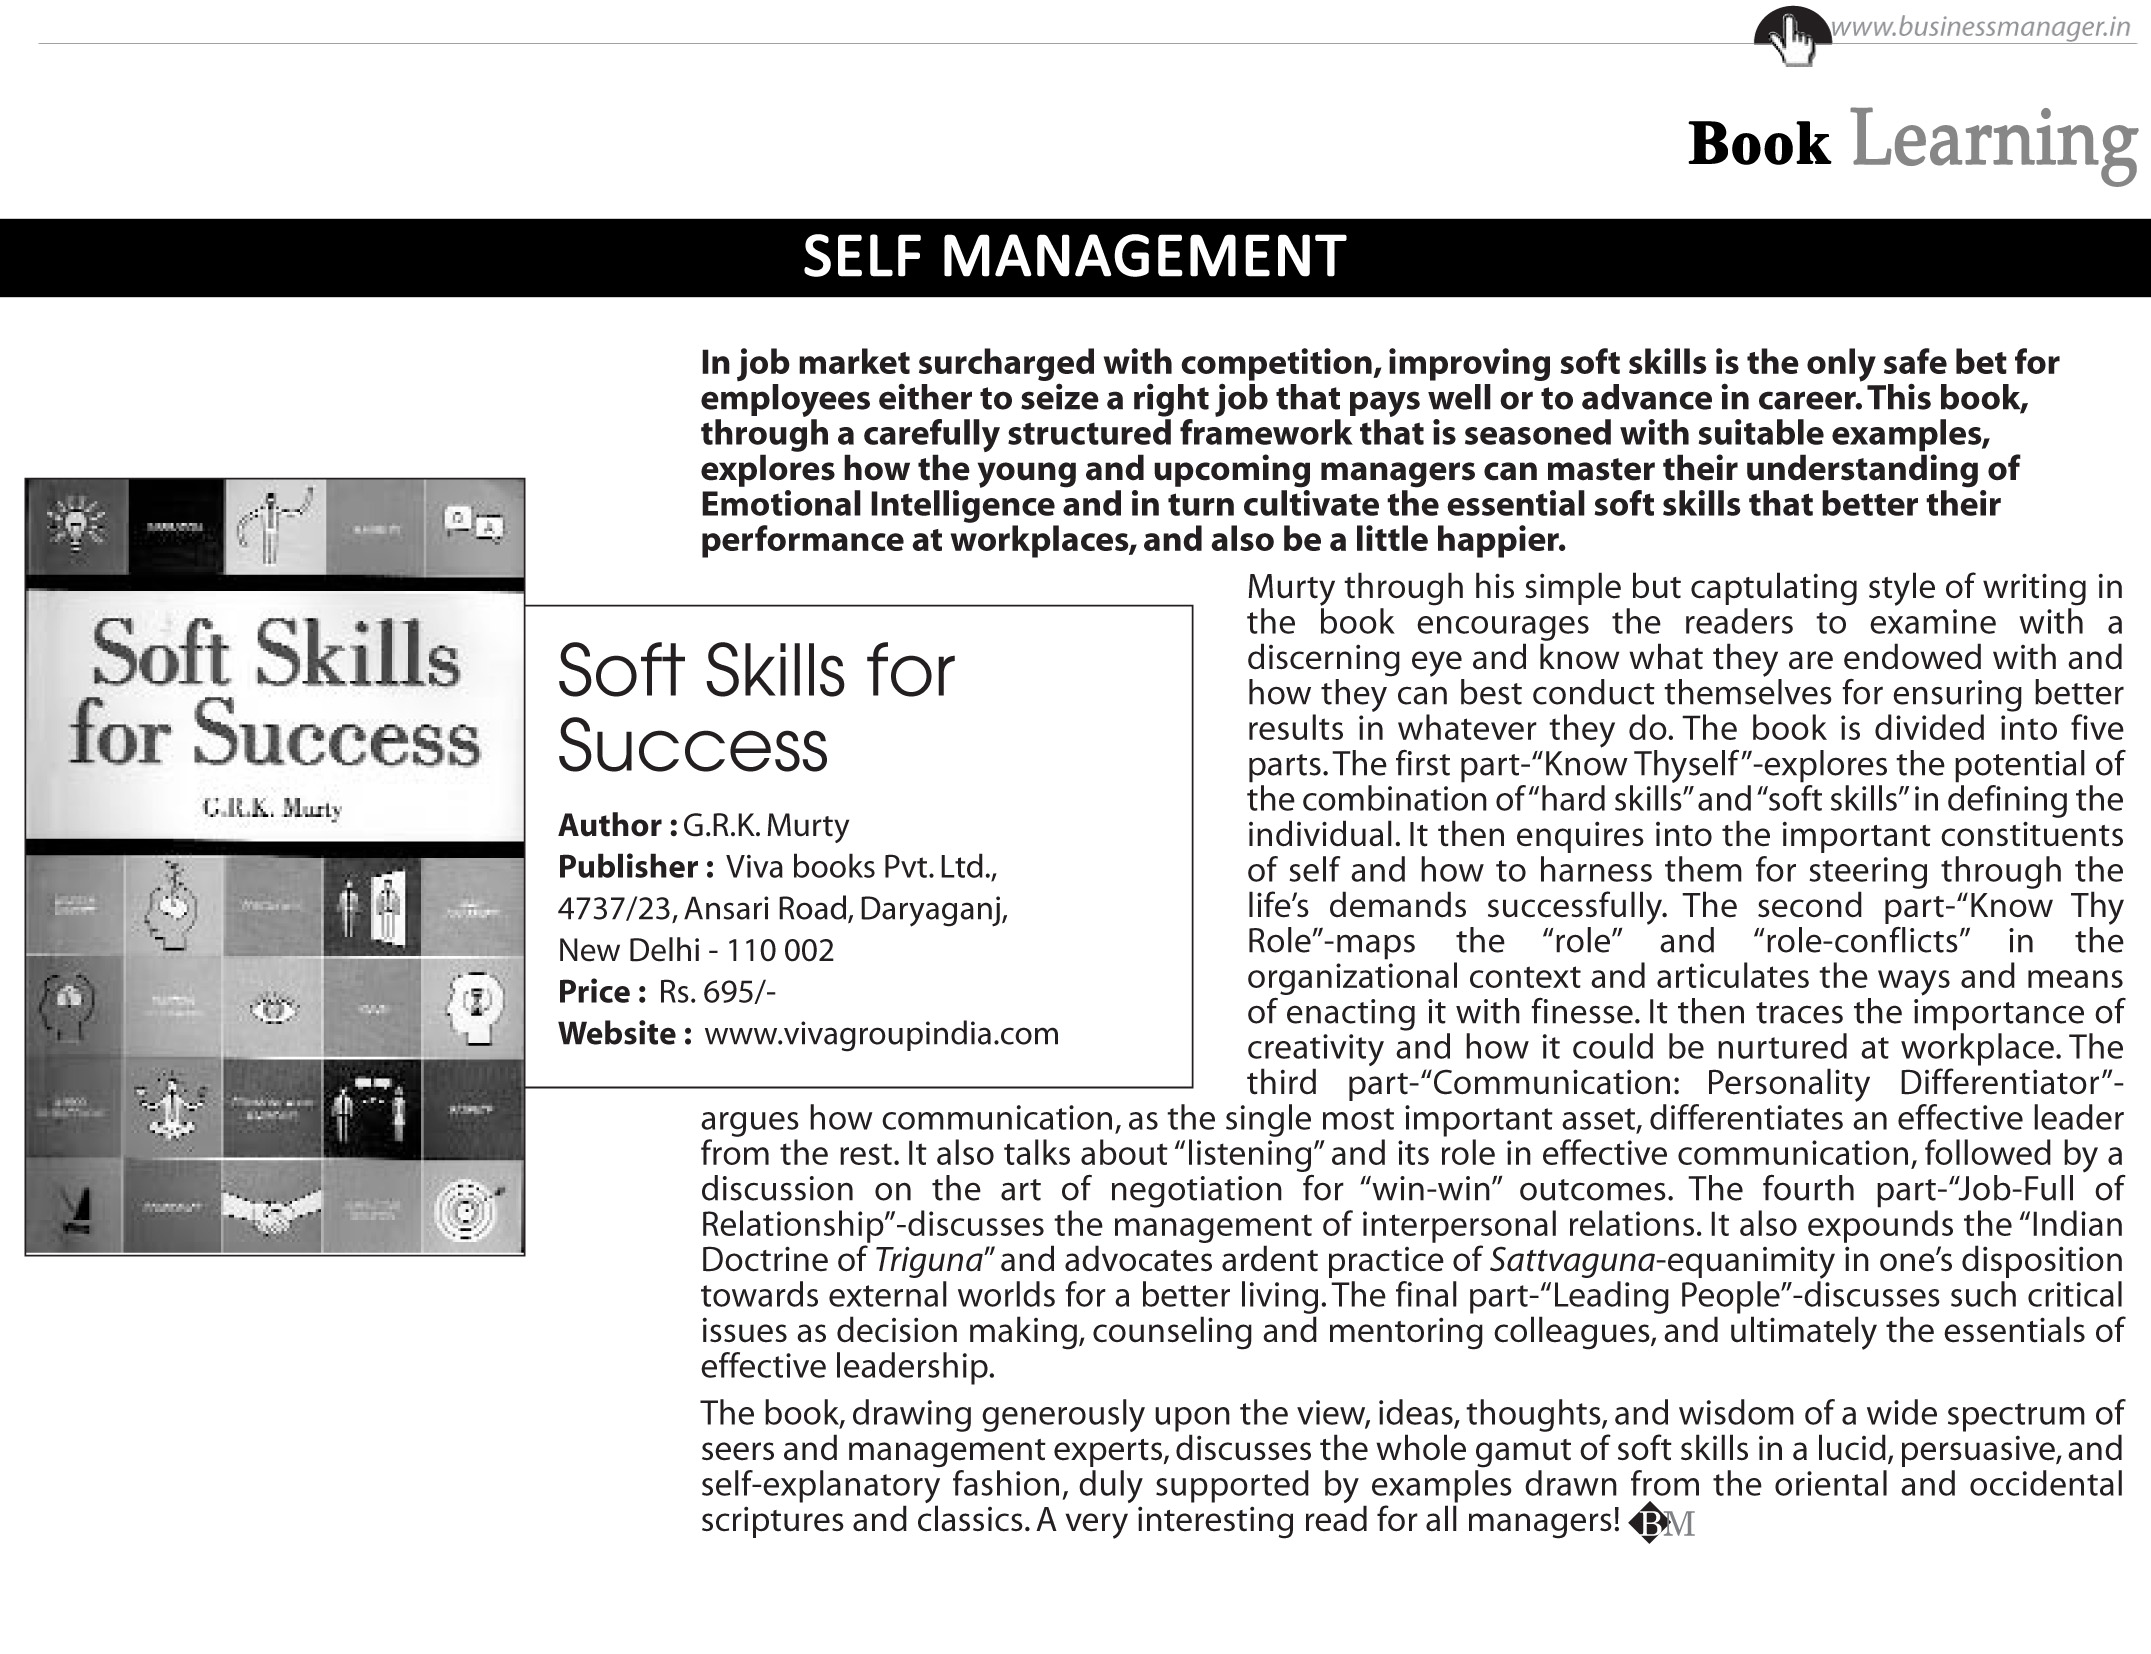 Business Manager: Self Management